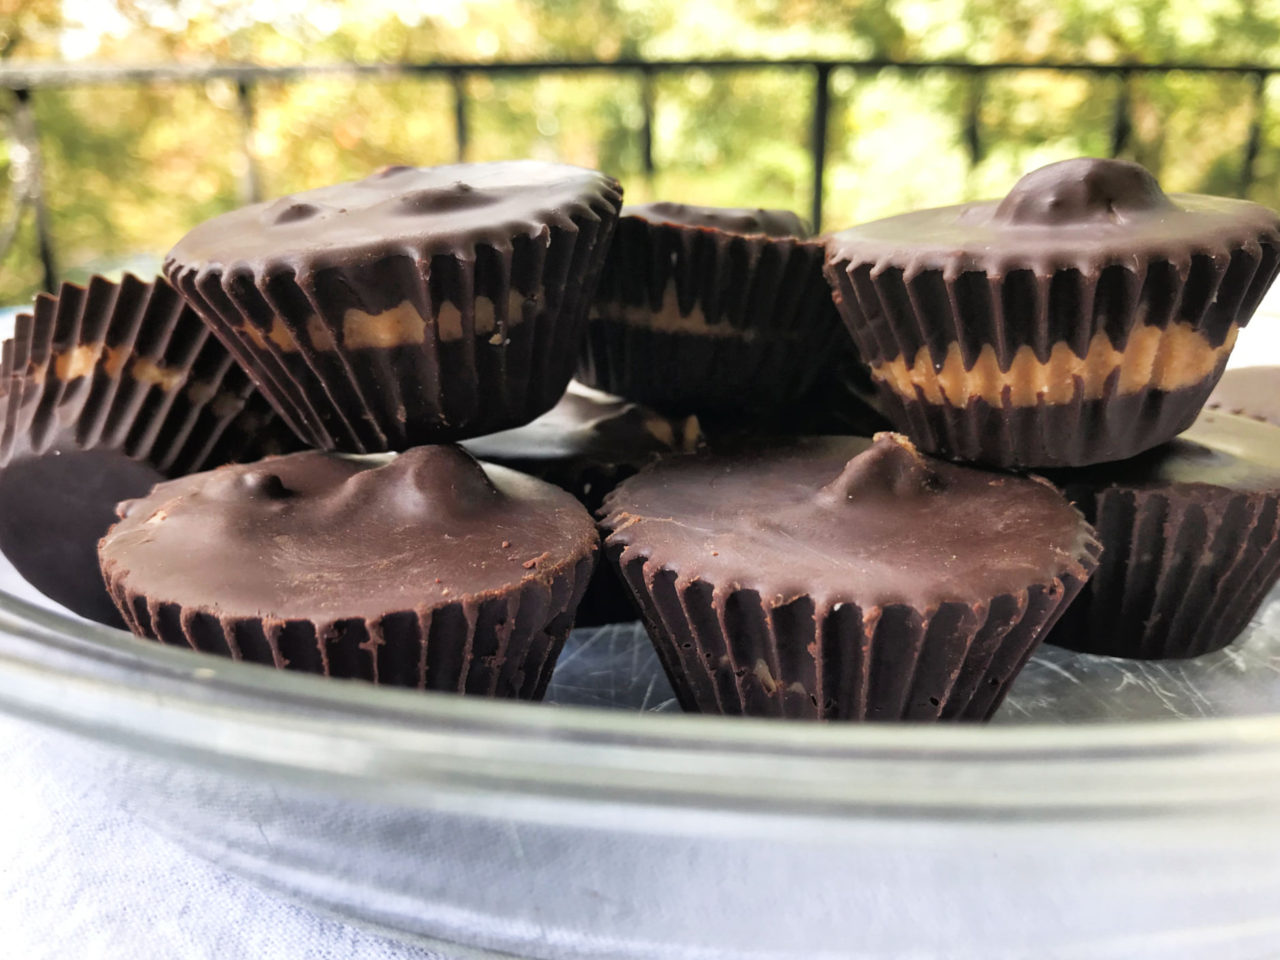 Keto Candy - Chocolate Peanut Butter Cups | Healthy Ambitions